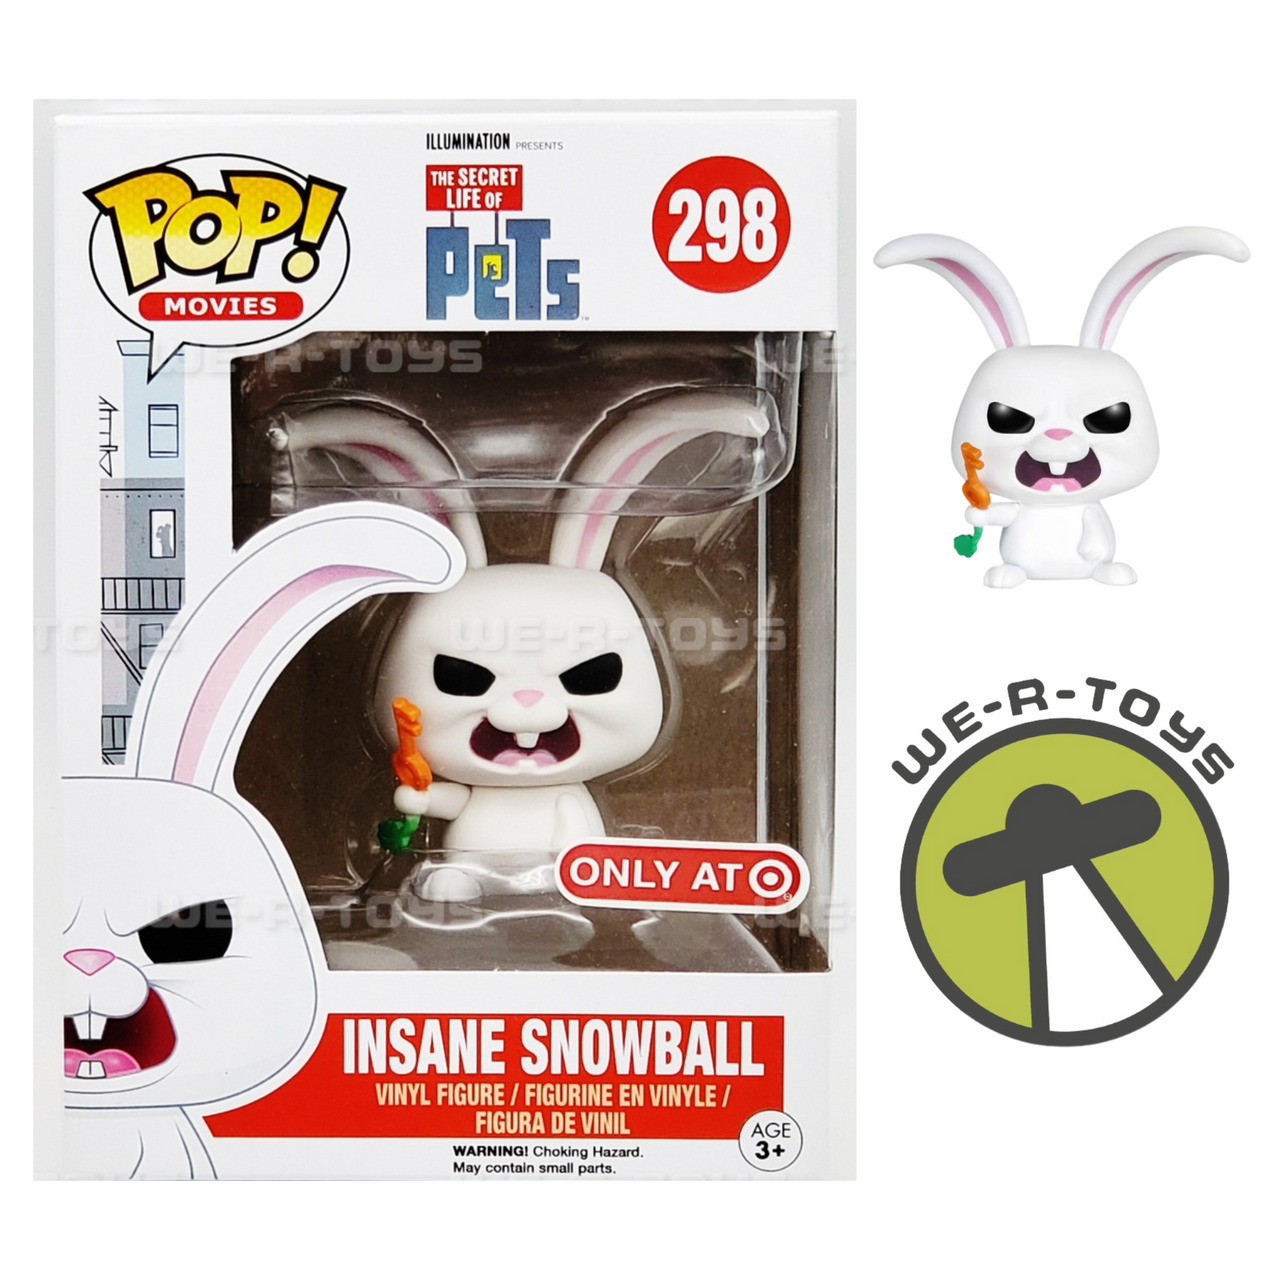 https://cdn11.bigcommerce.com/s-cy4lua1xoh/images/stencil/1280x1280/products/28722/258265/masters-of-the-universe-the-secret-life-of-pets-insane-snowball-vinyl-figure-movies-funko-pop-298-new__69126.1691322935.jpg?c=1